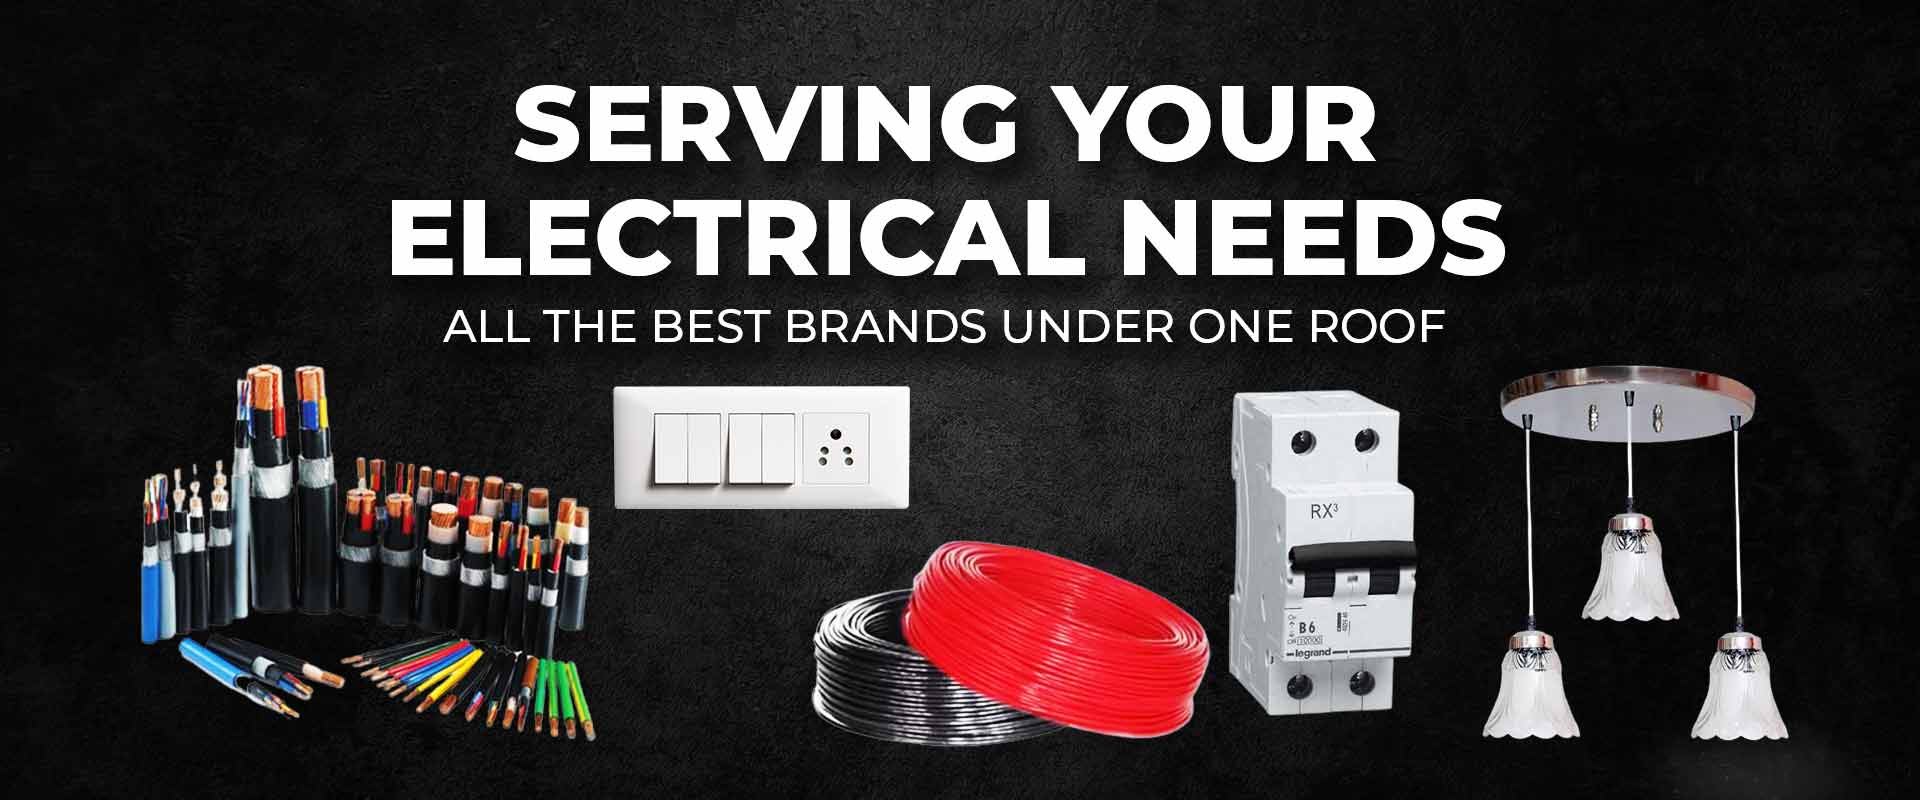 Luxmi Electrical Serving Your Electrical Needs